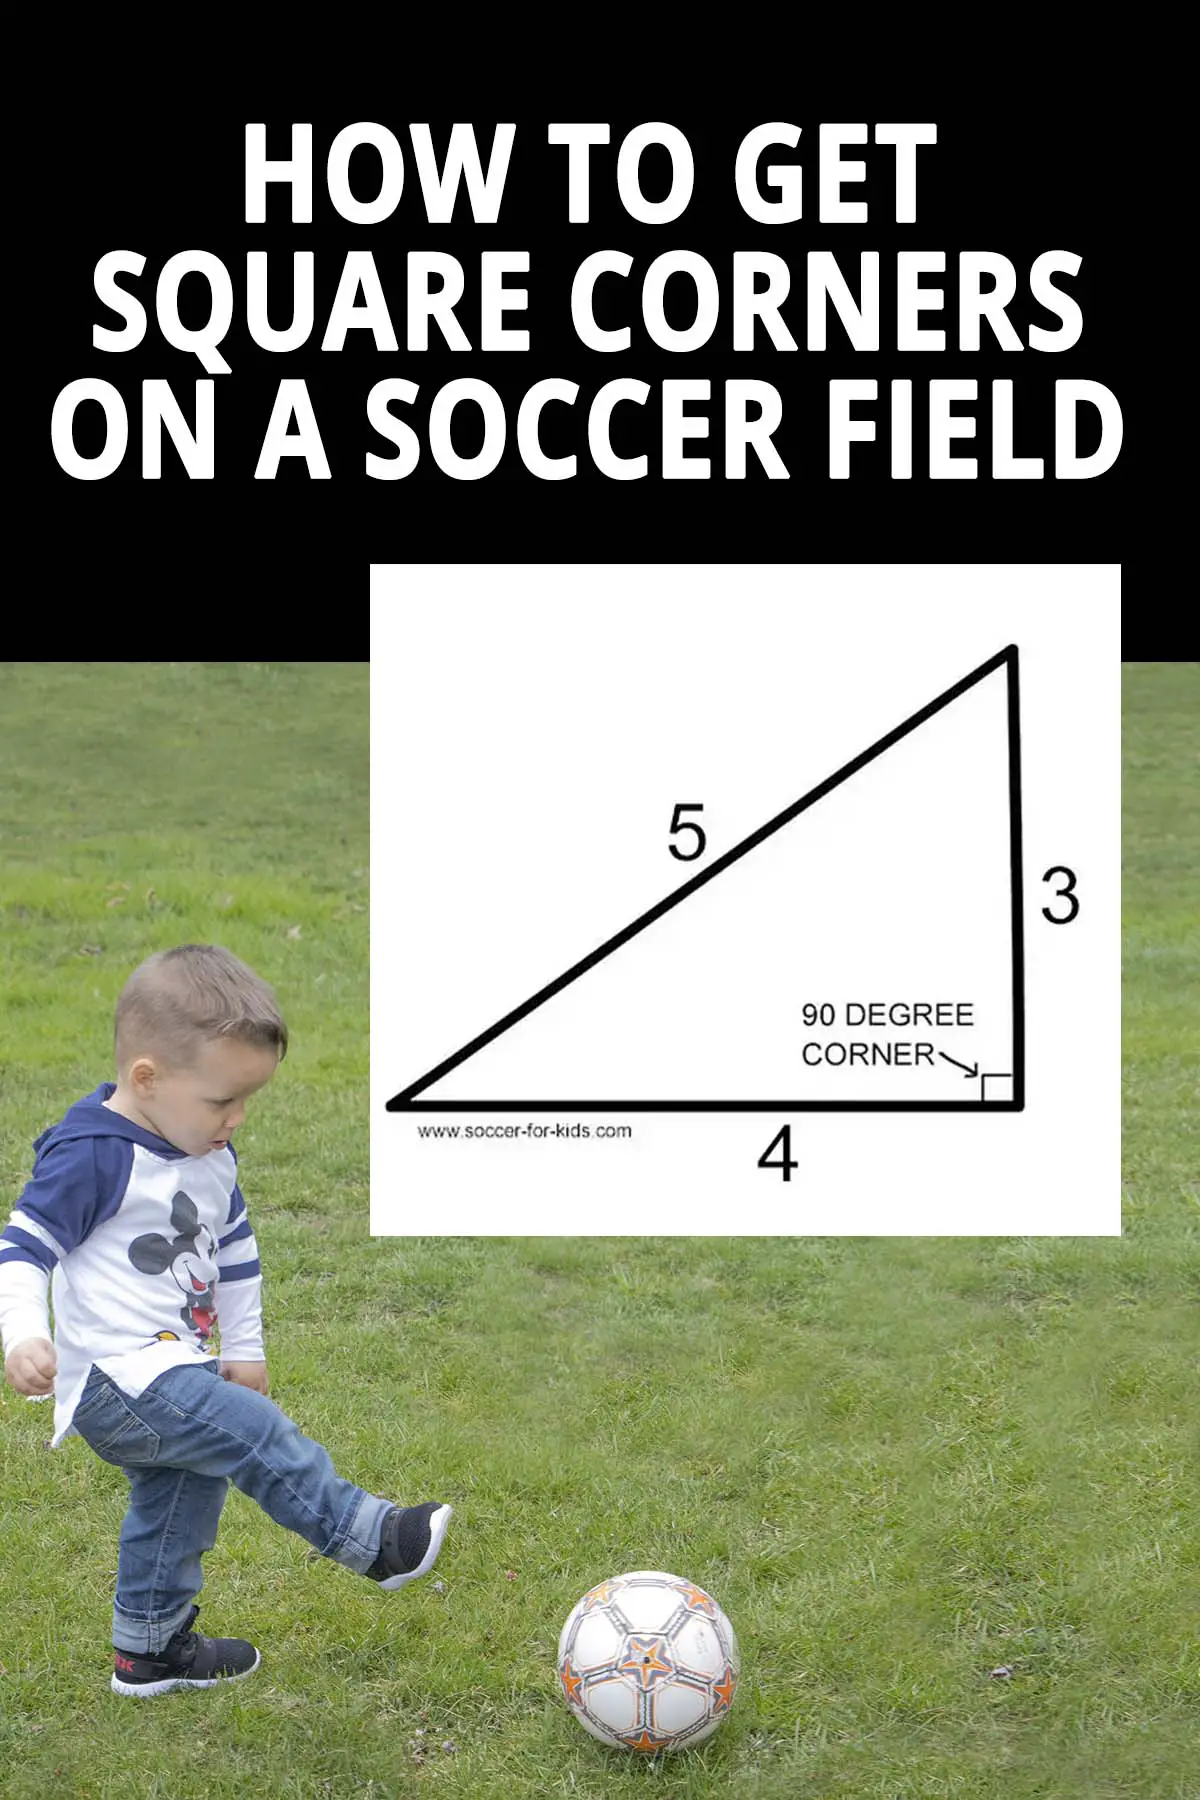 Square corners for soccer fields